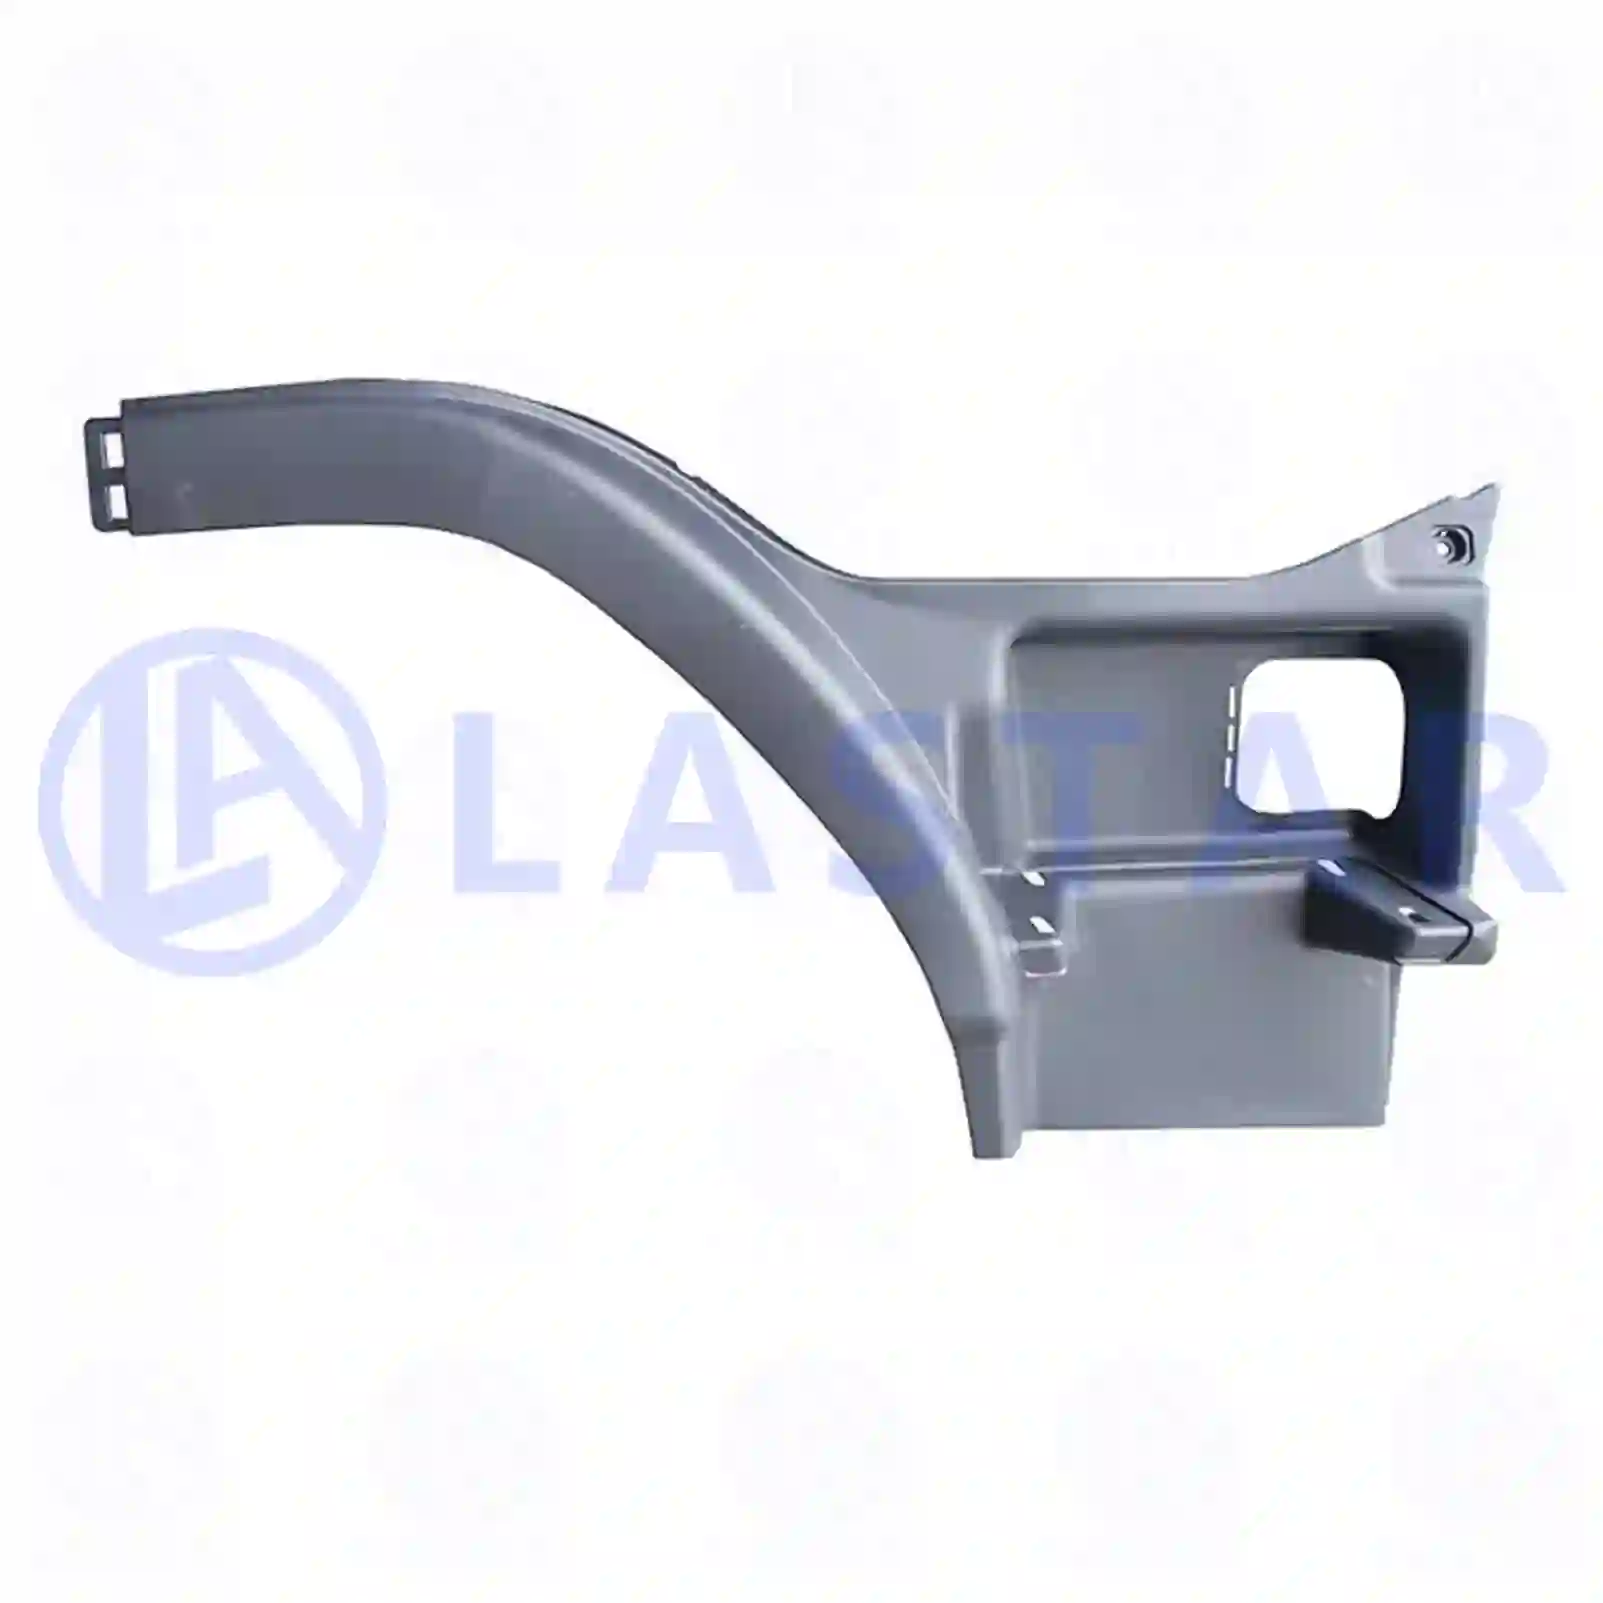 Boarding Step Step well case, right, la no: 77718002 ,  oem no:20529483, 3175159 Lastar Spare Part | Truck Spare Parts, Auotomotive Spare Parts